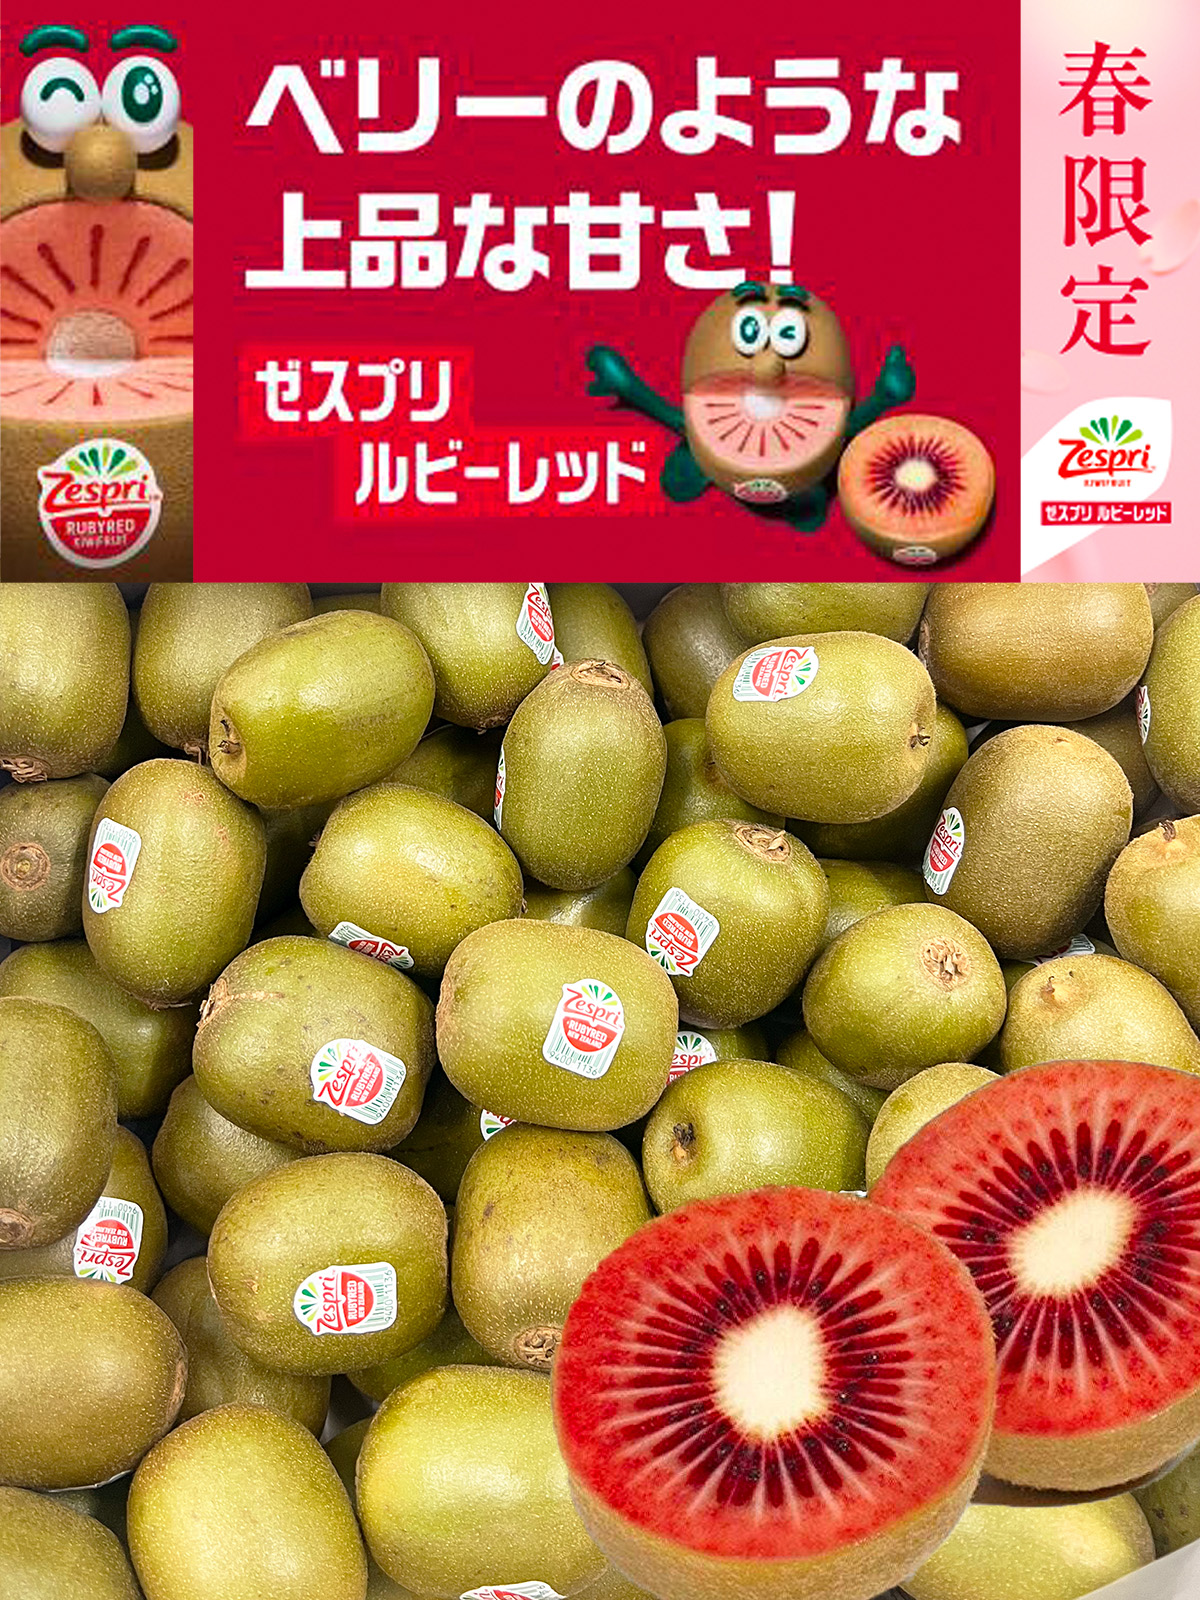 <zespli> ruby red kiwi fruit approximately 2kg 20~25 sphere rom and rear (before and after) New Zealand production red kiwi fruit valuable goods kind elegant .. carefuly selected fruit . unusual . Mother's Day spring limitation < safe domestic inspection goods >